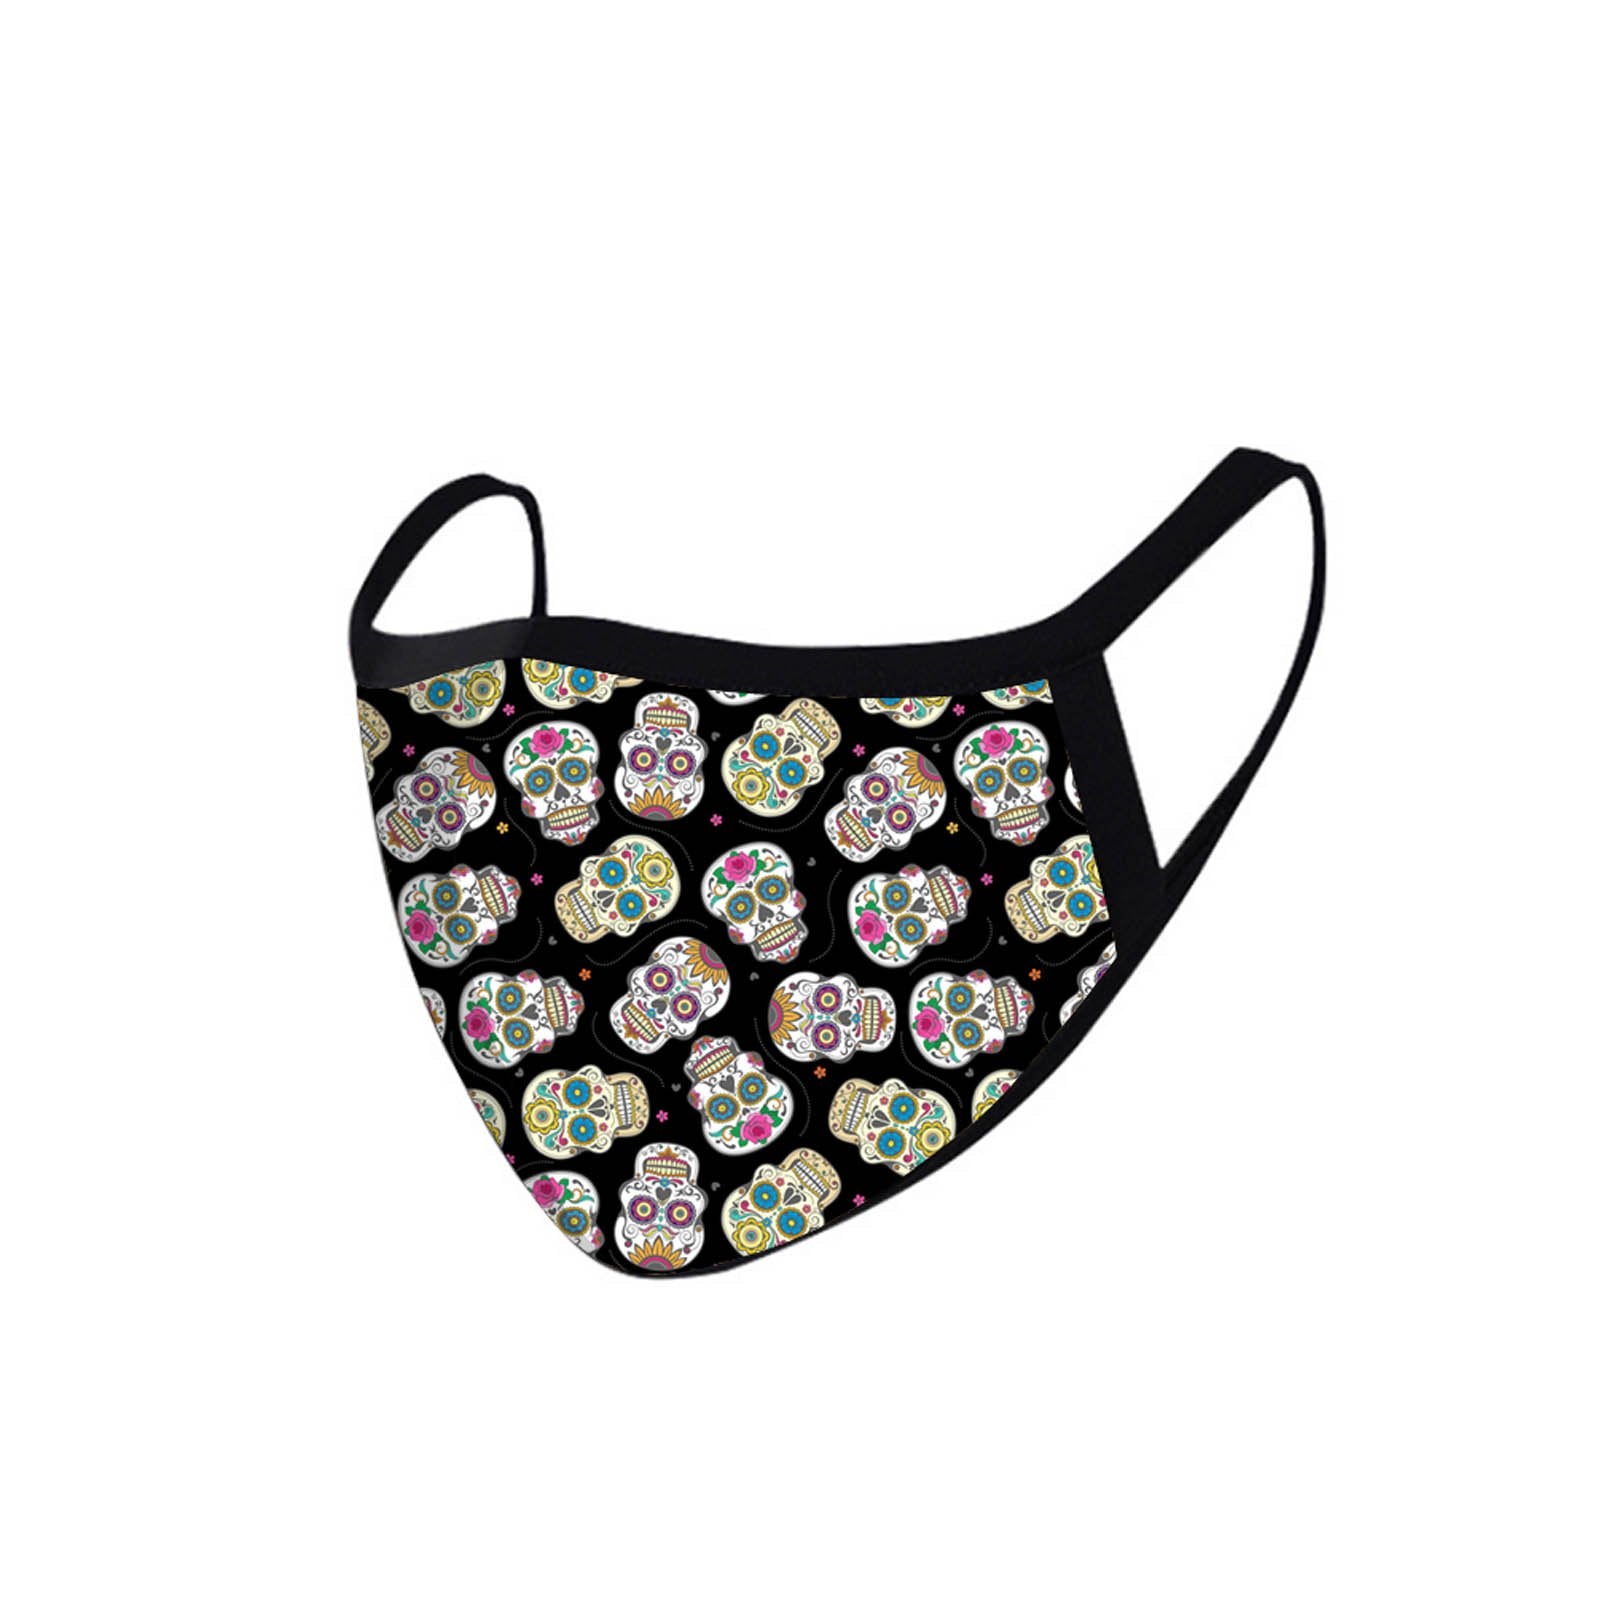 FCM-022 American Bling Black Multi Color Sugar Skull Fabric Face Mask Double Layer Set of 2